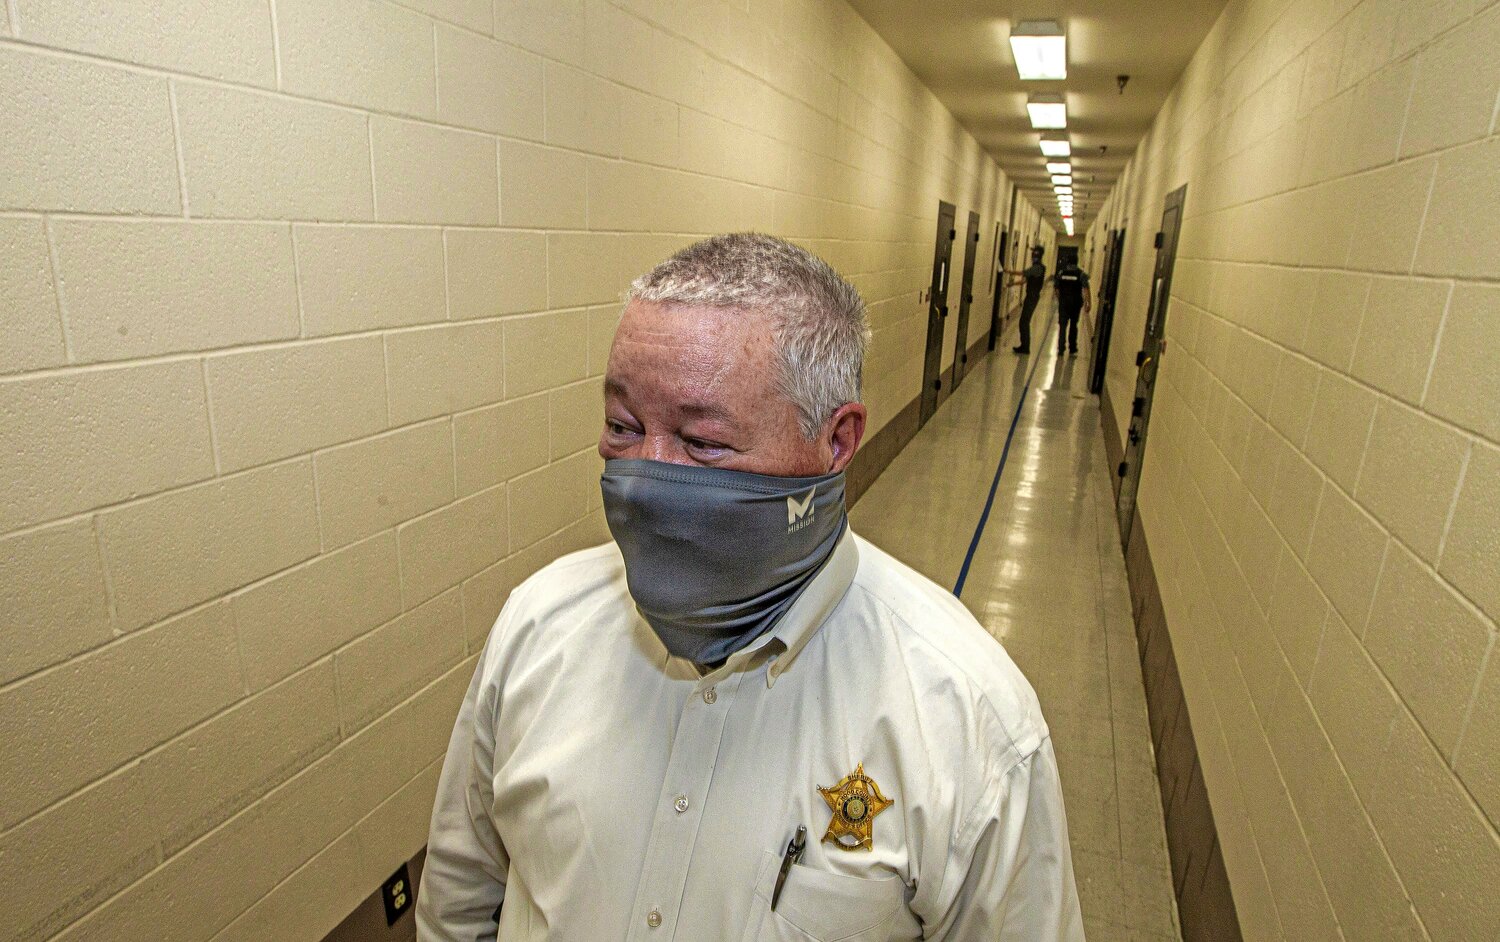 Hood County Sheriff Roger Deeds standing in one of the corridors of the menÕs wing inside the Hood County Jail while detention officers make their rounds. Photo taken inside the Hood County Jail Wednesday, Sept. 16, 2020.